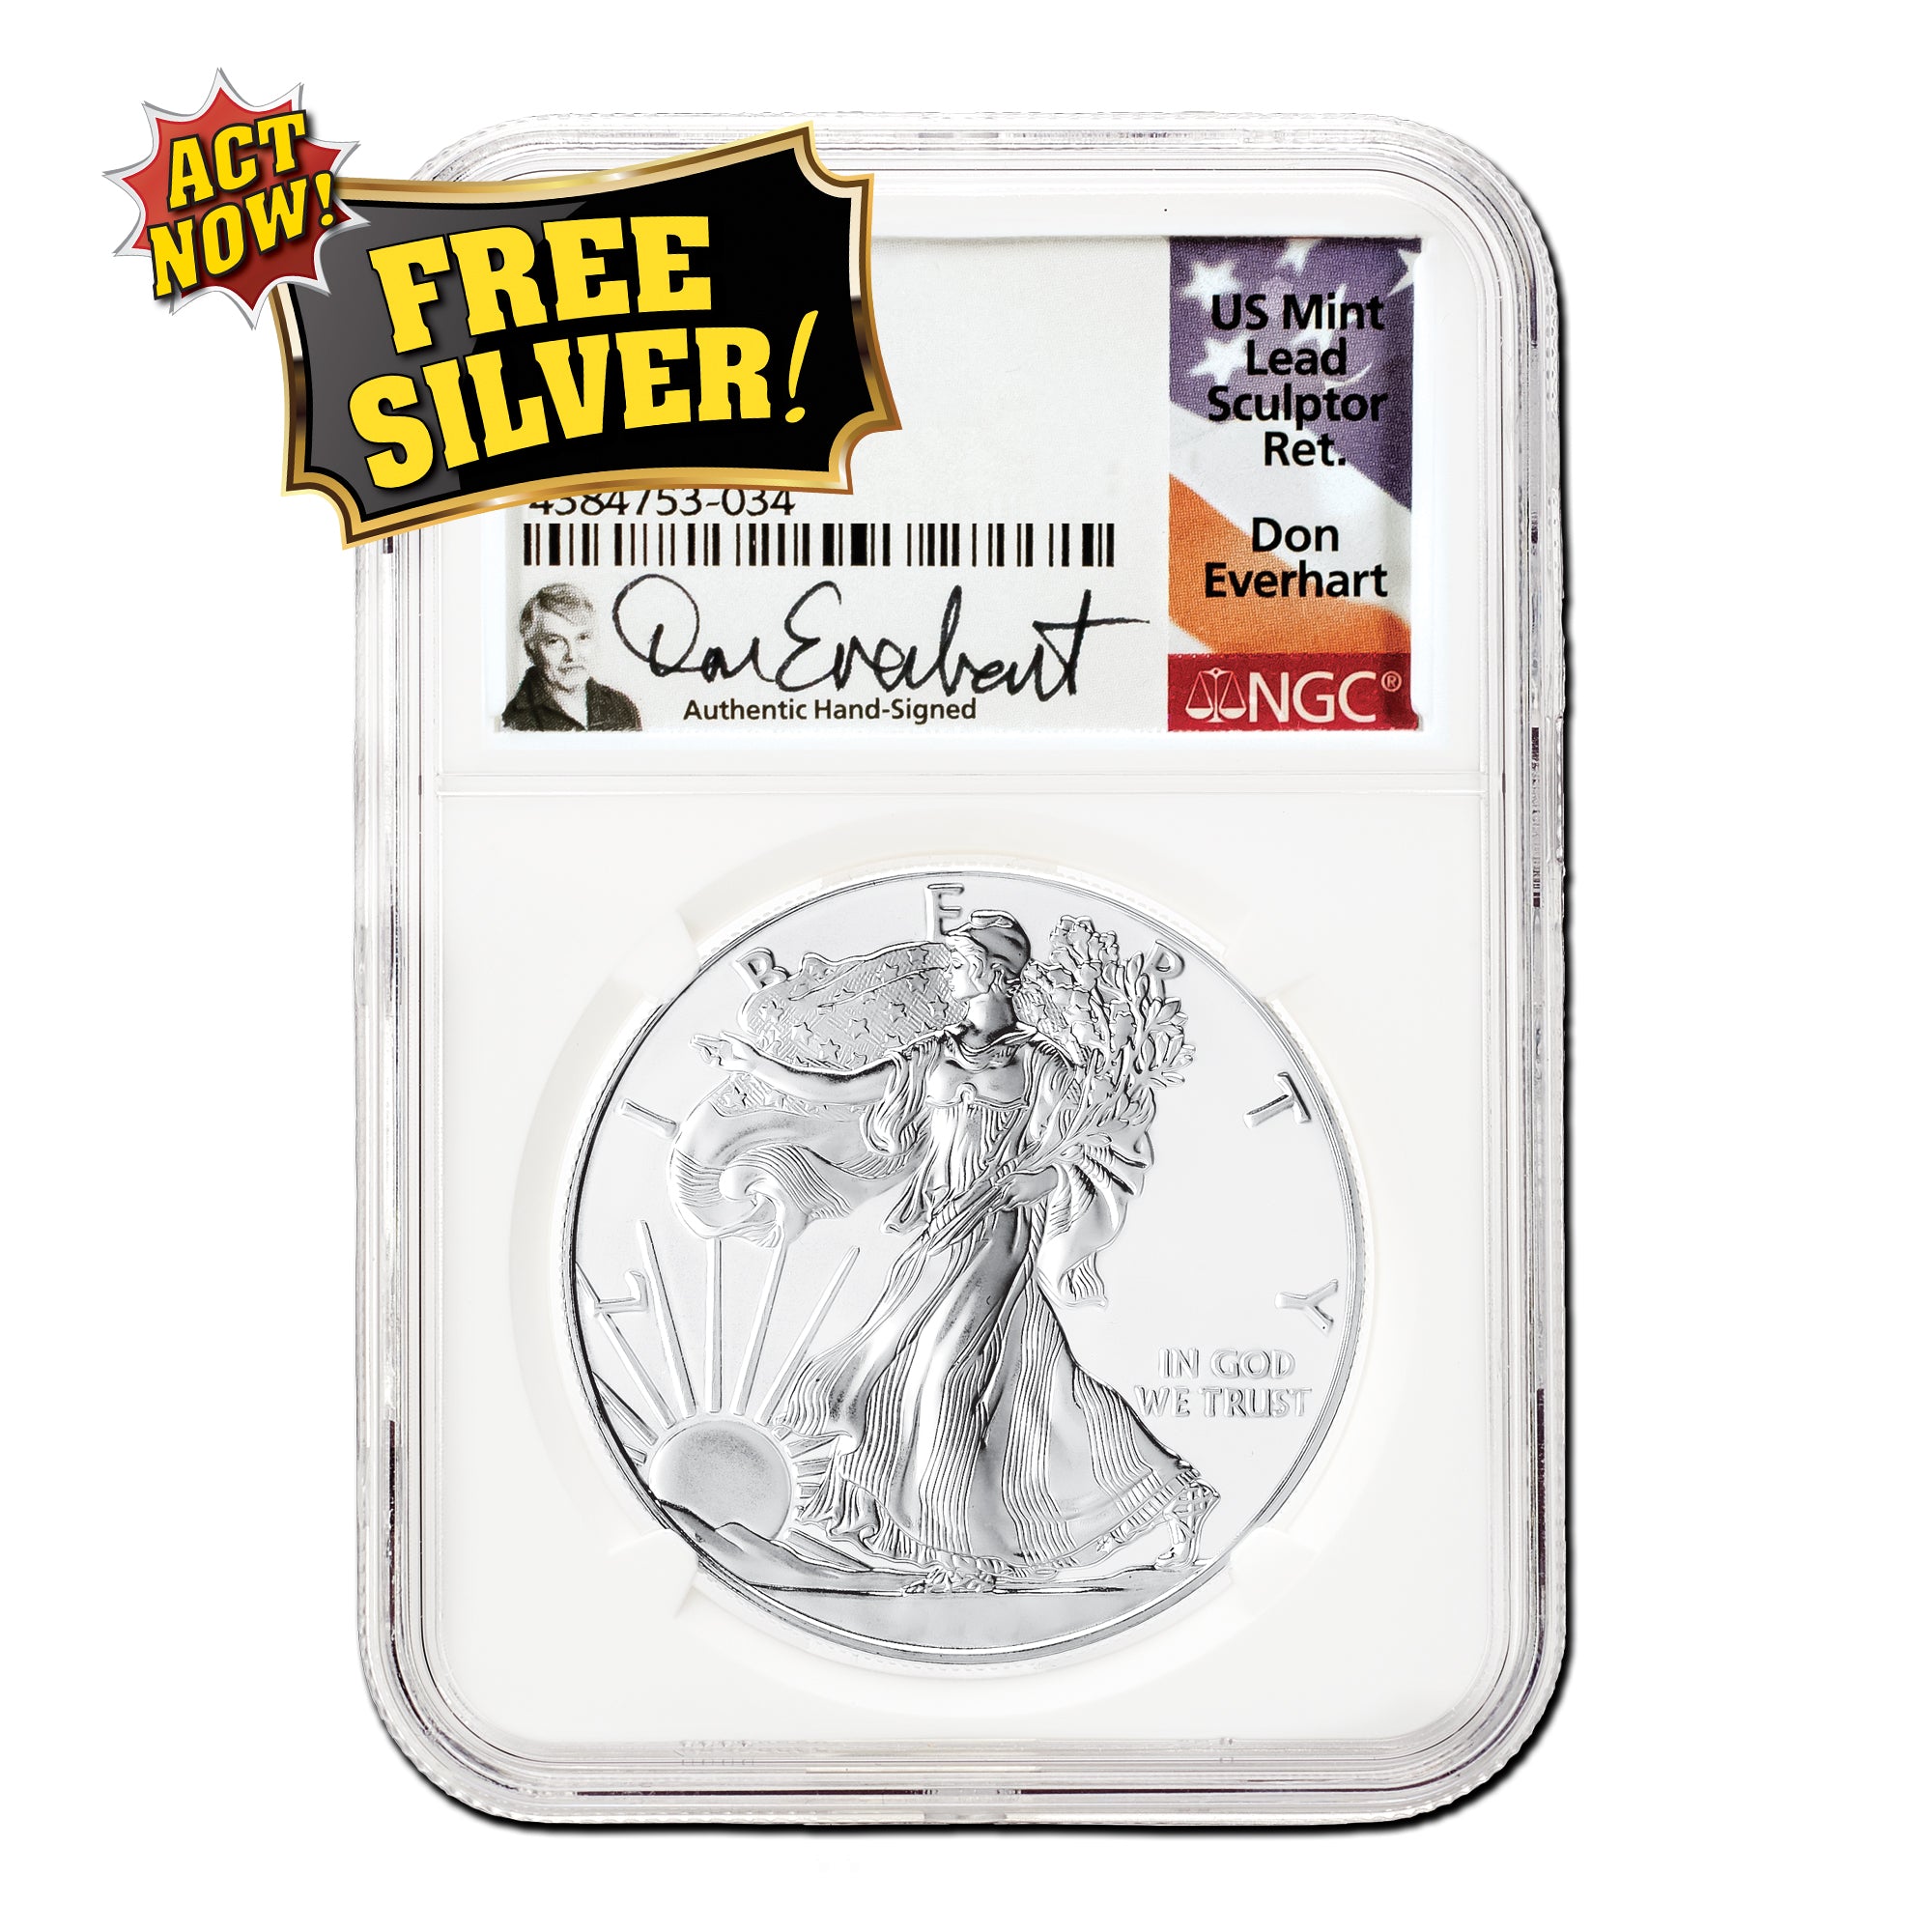 $50 GOLD EAGLE Only $2,325 with FREE SILVER